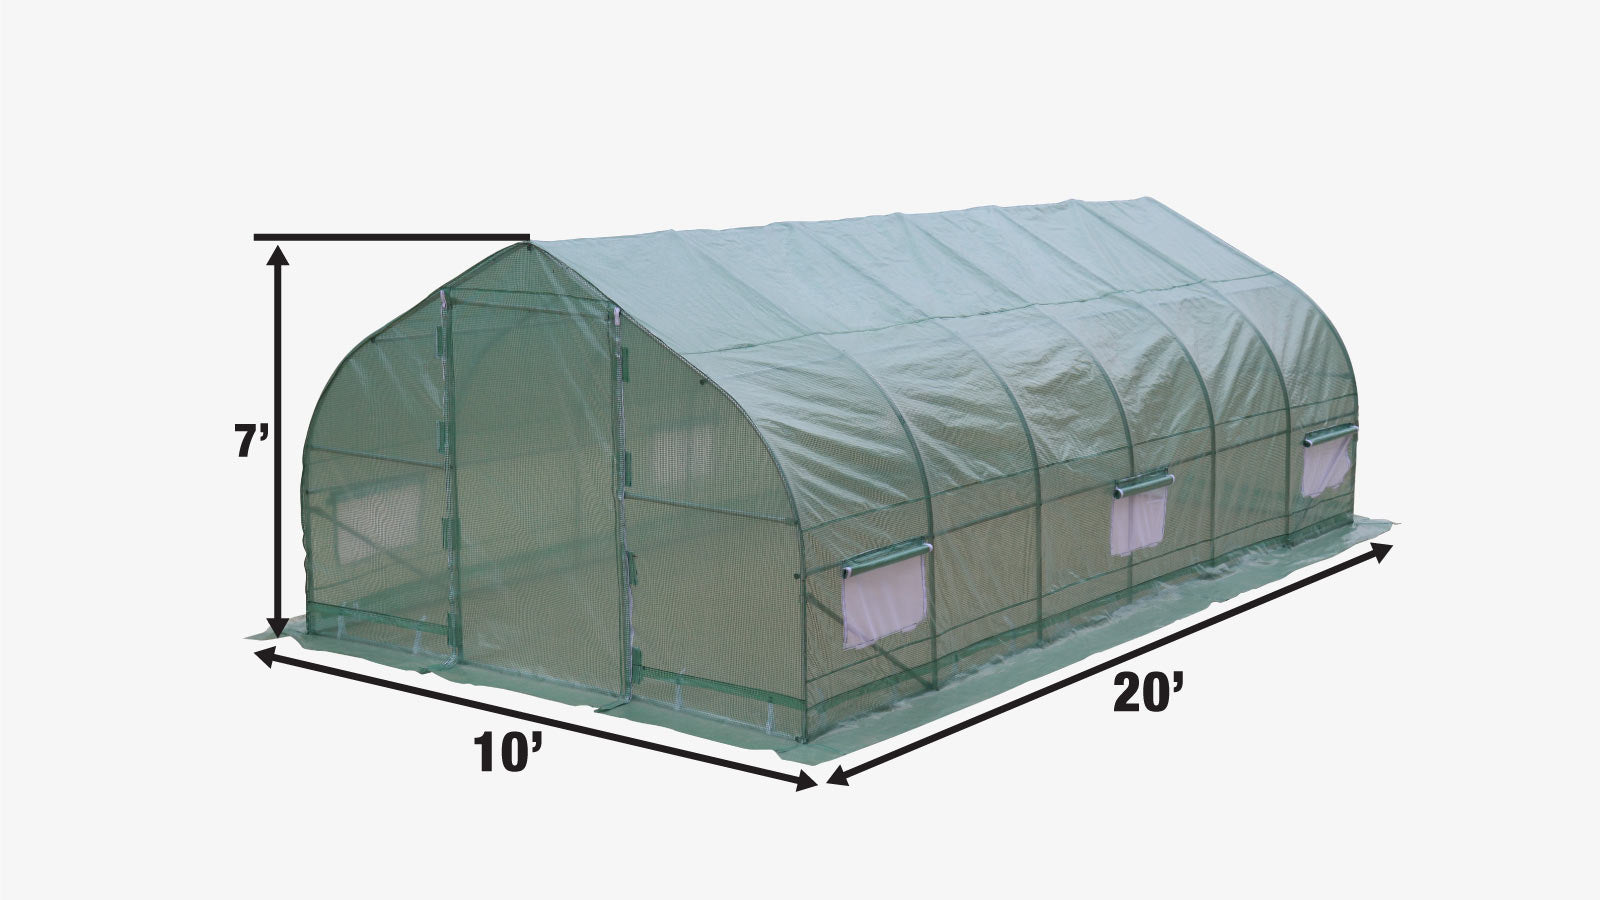 TMG Industrial 10’ x 20’ Tunnel Greenhouse Grow Tent w/Ripstop Leno Cover, Cold Frame, Roll-Up Mesh Windows, Peak Roof, TMG-GH1020P-specifications-image